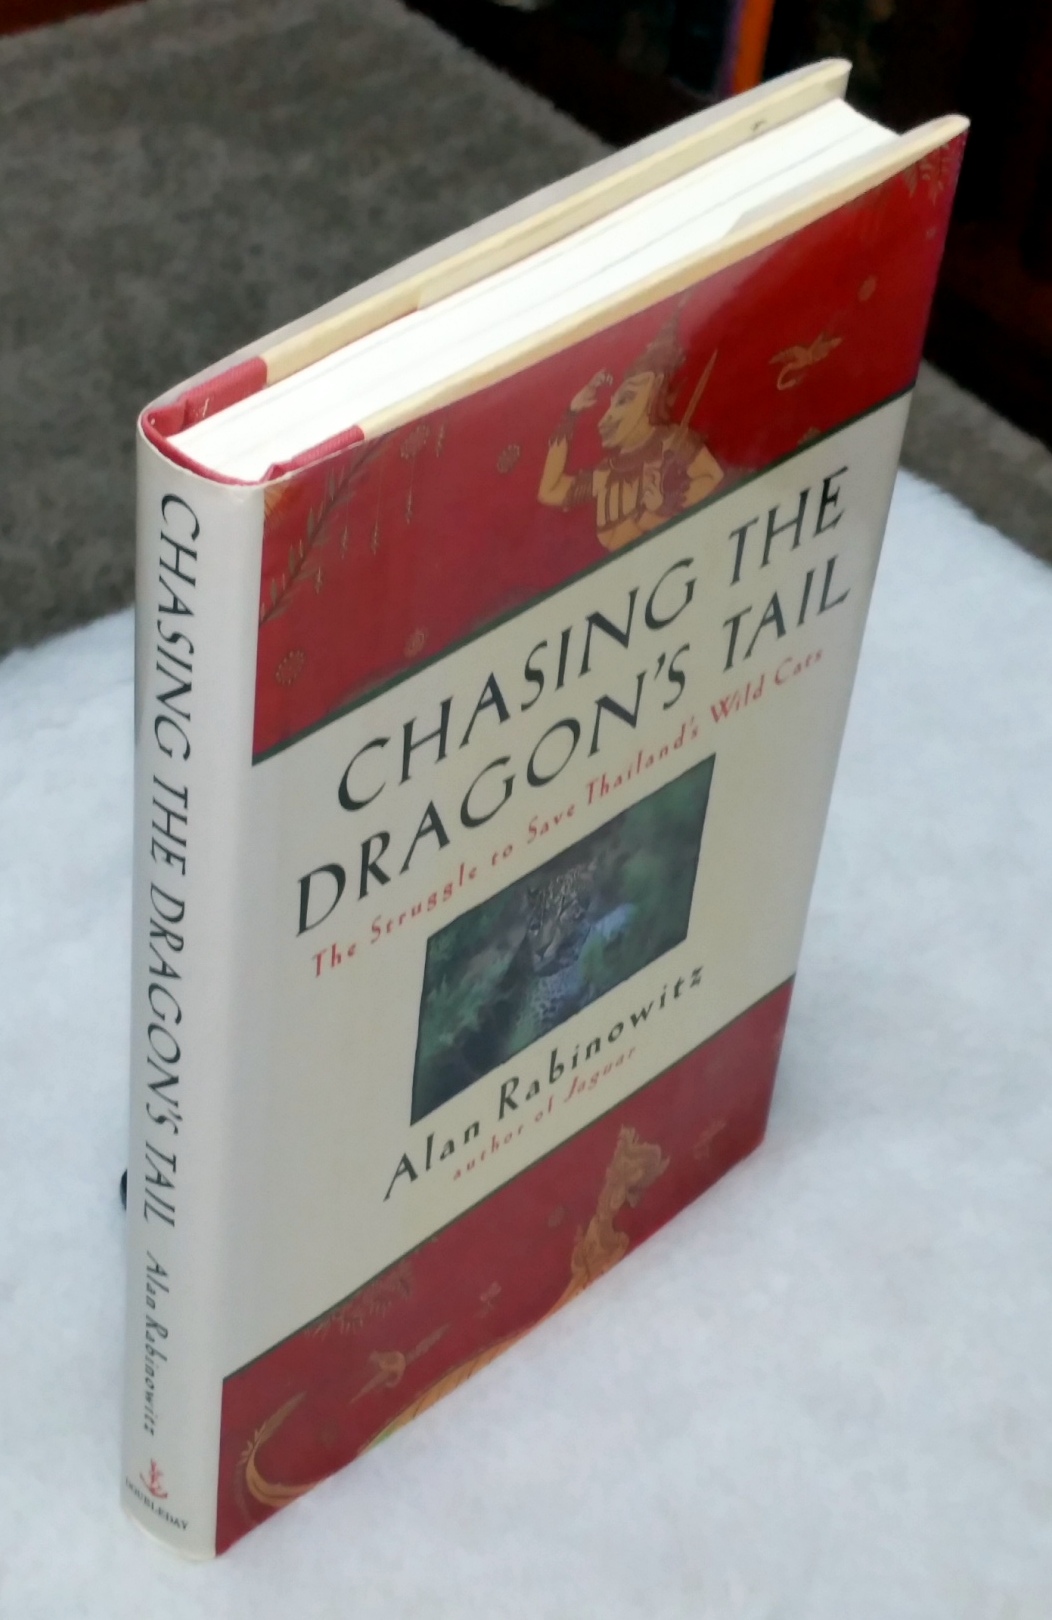 Chasing the Dragon's Tail